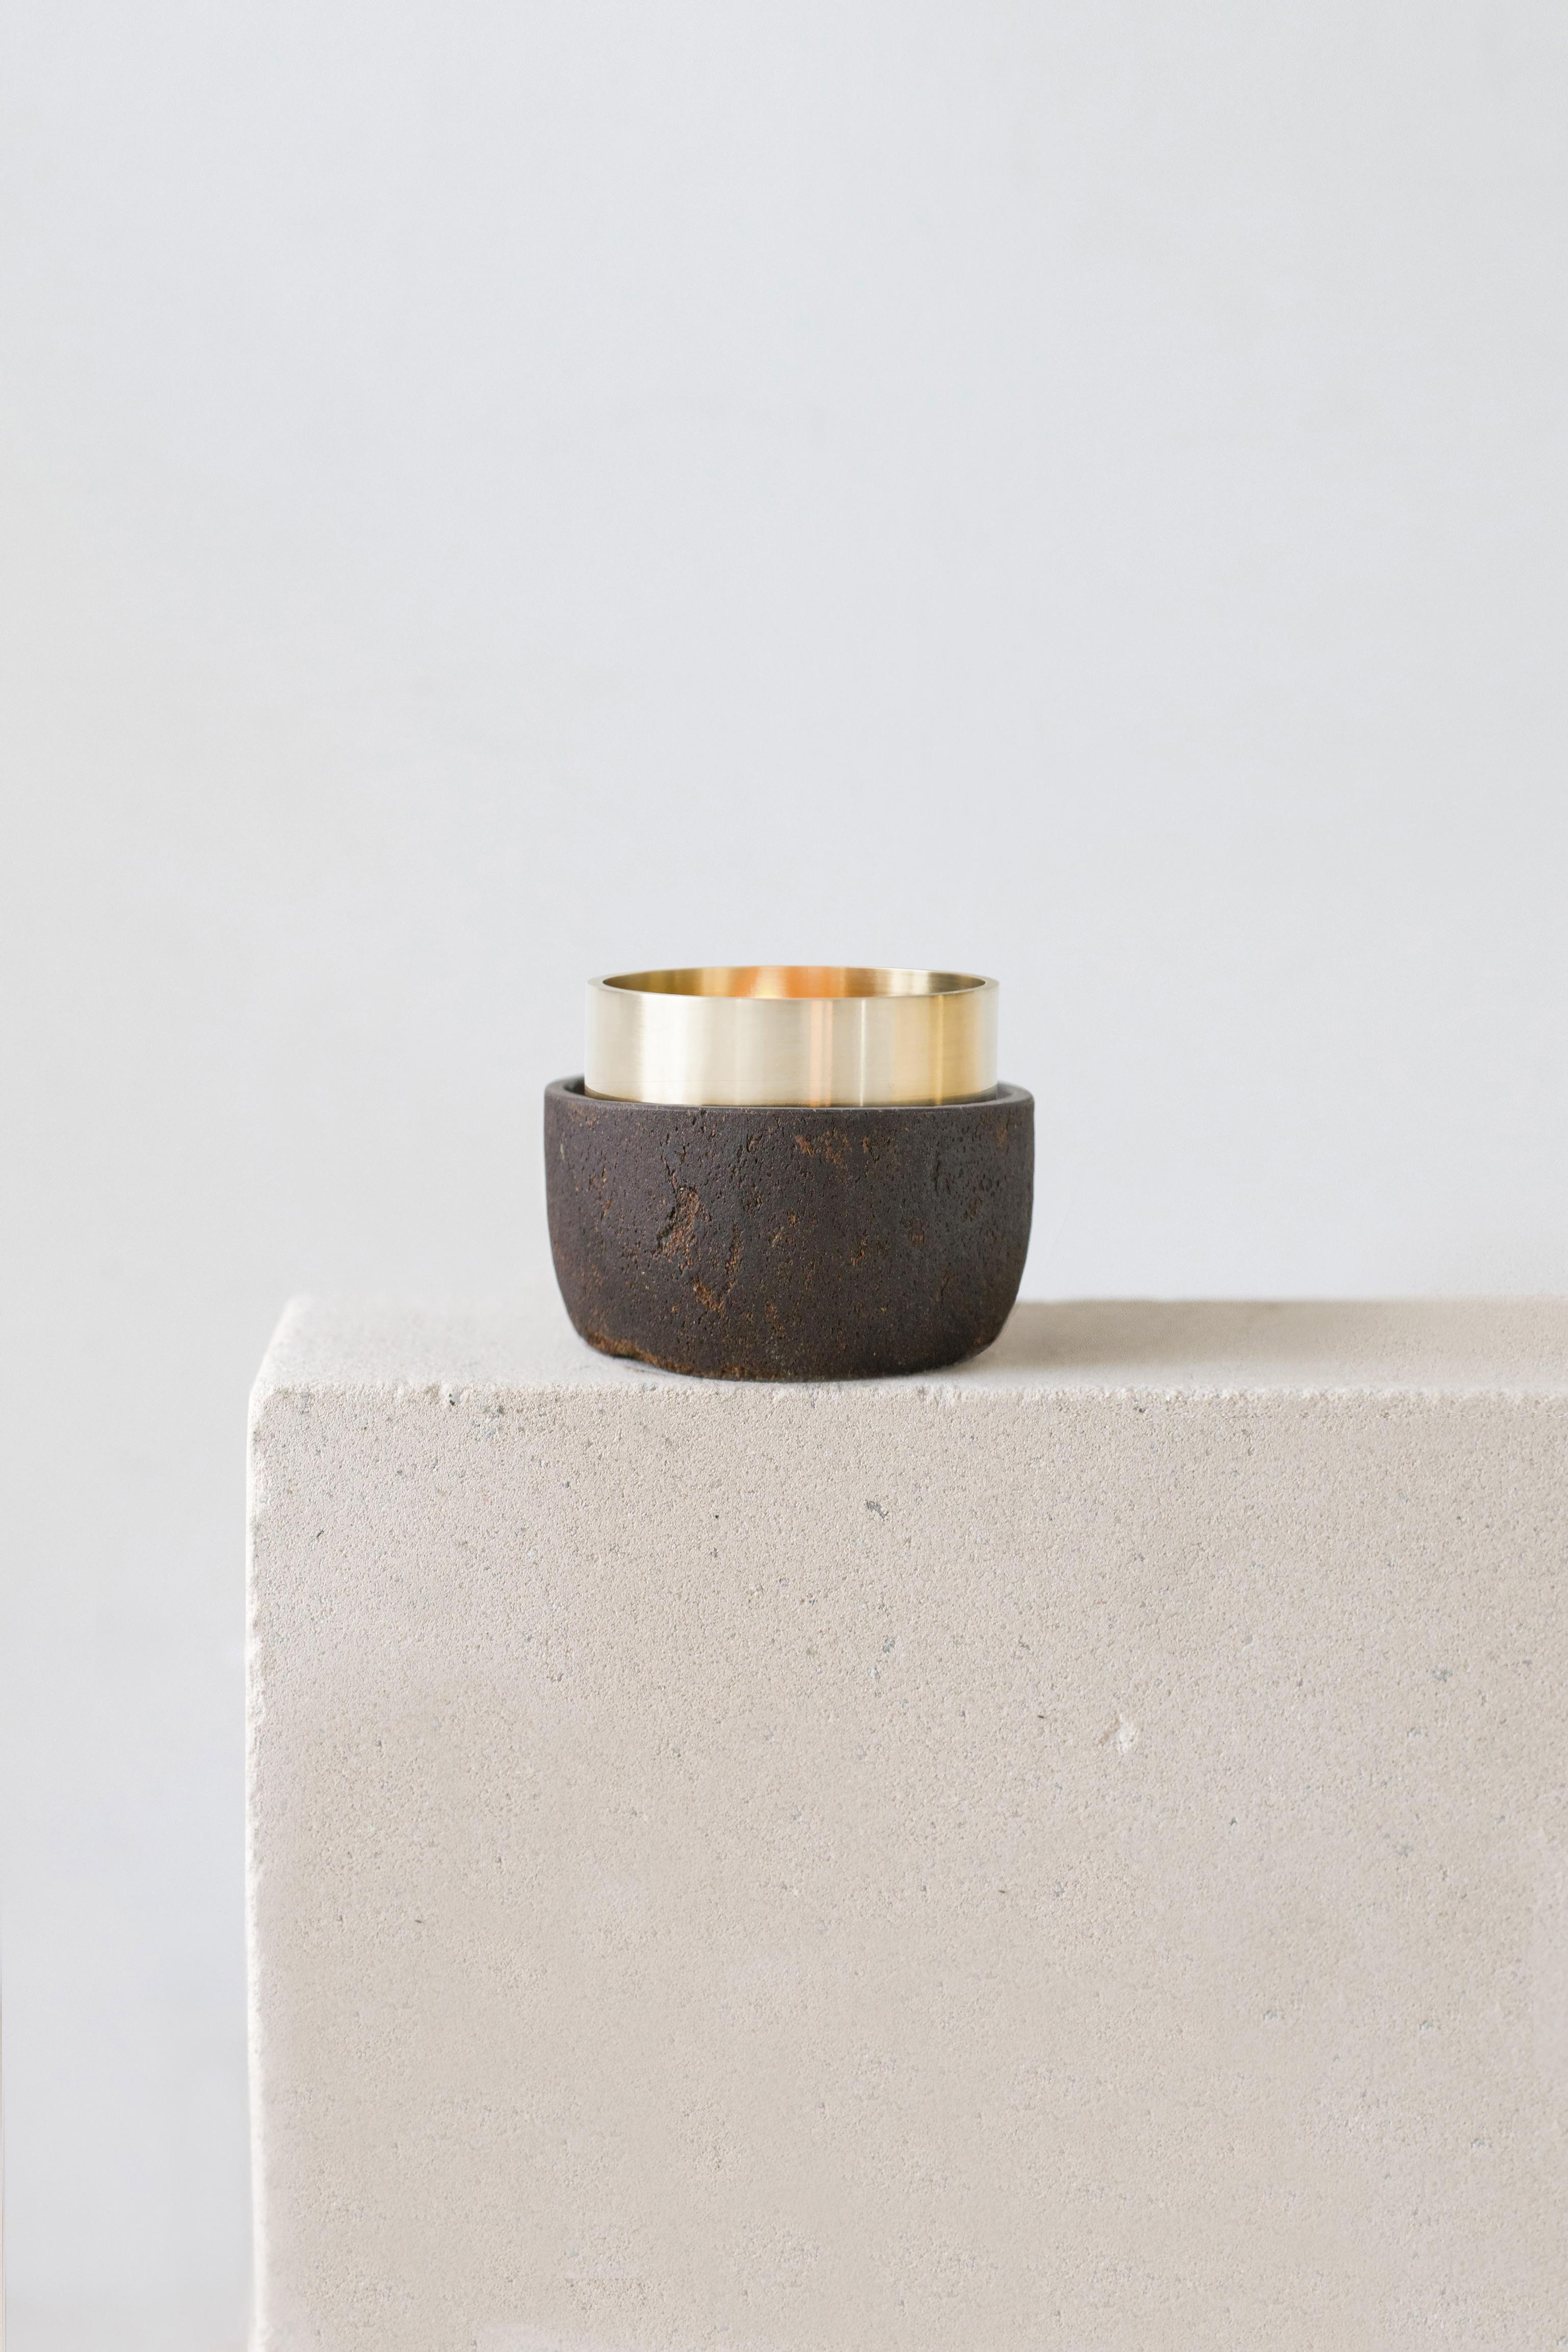 Oak candle holder by Evelina Kudabaite Studio
Handmade
Materials: oak, brass
Dimensions: H 55 mm x D 65 mm
Colour: dark brown
Notes: for dry use

Since 2015, product designer Evelina Kudabaite keeps on developing and making GIRIA objects.